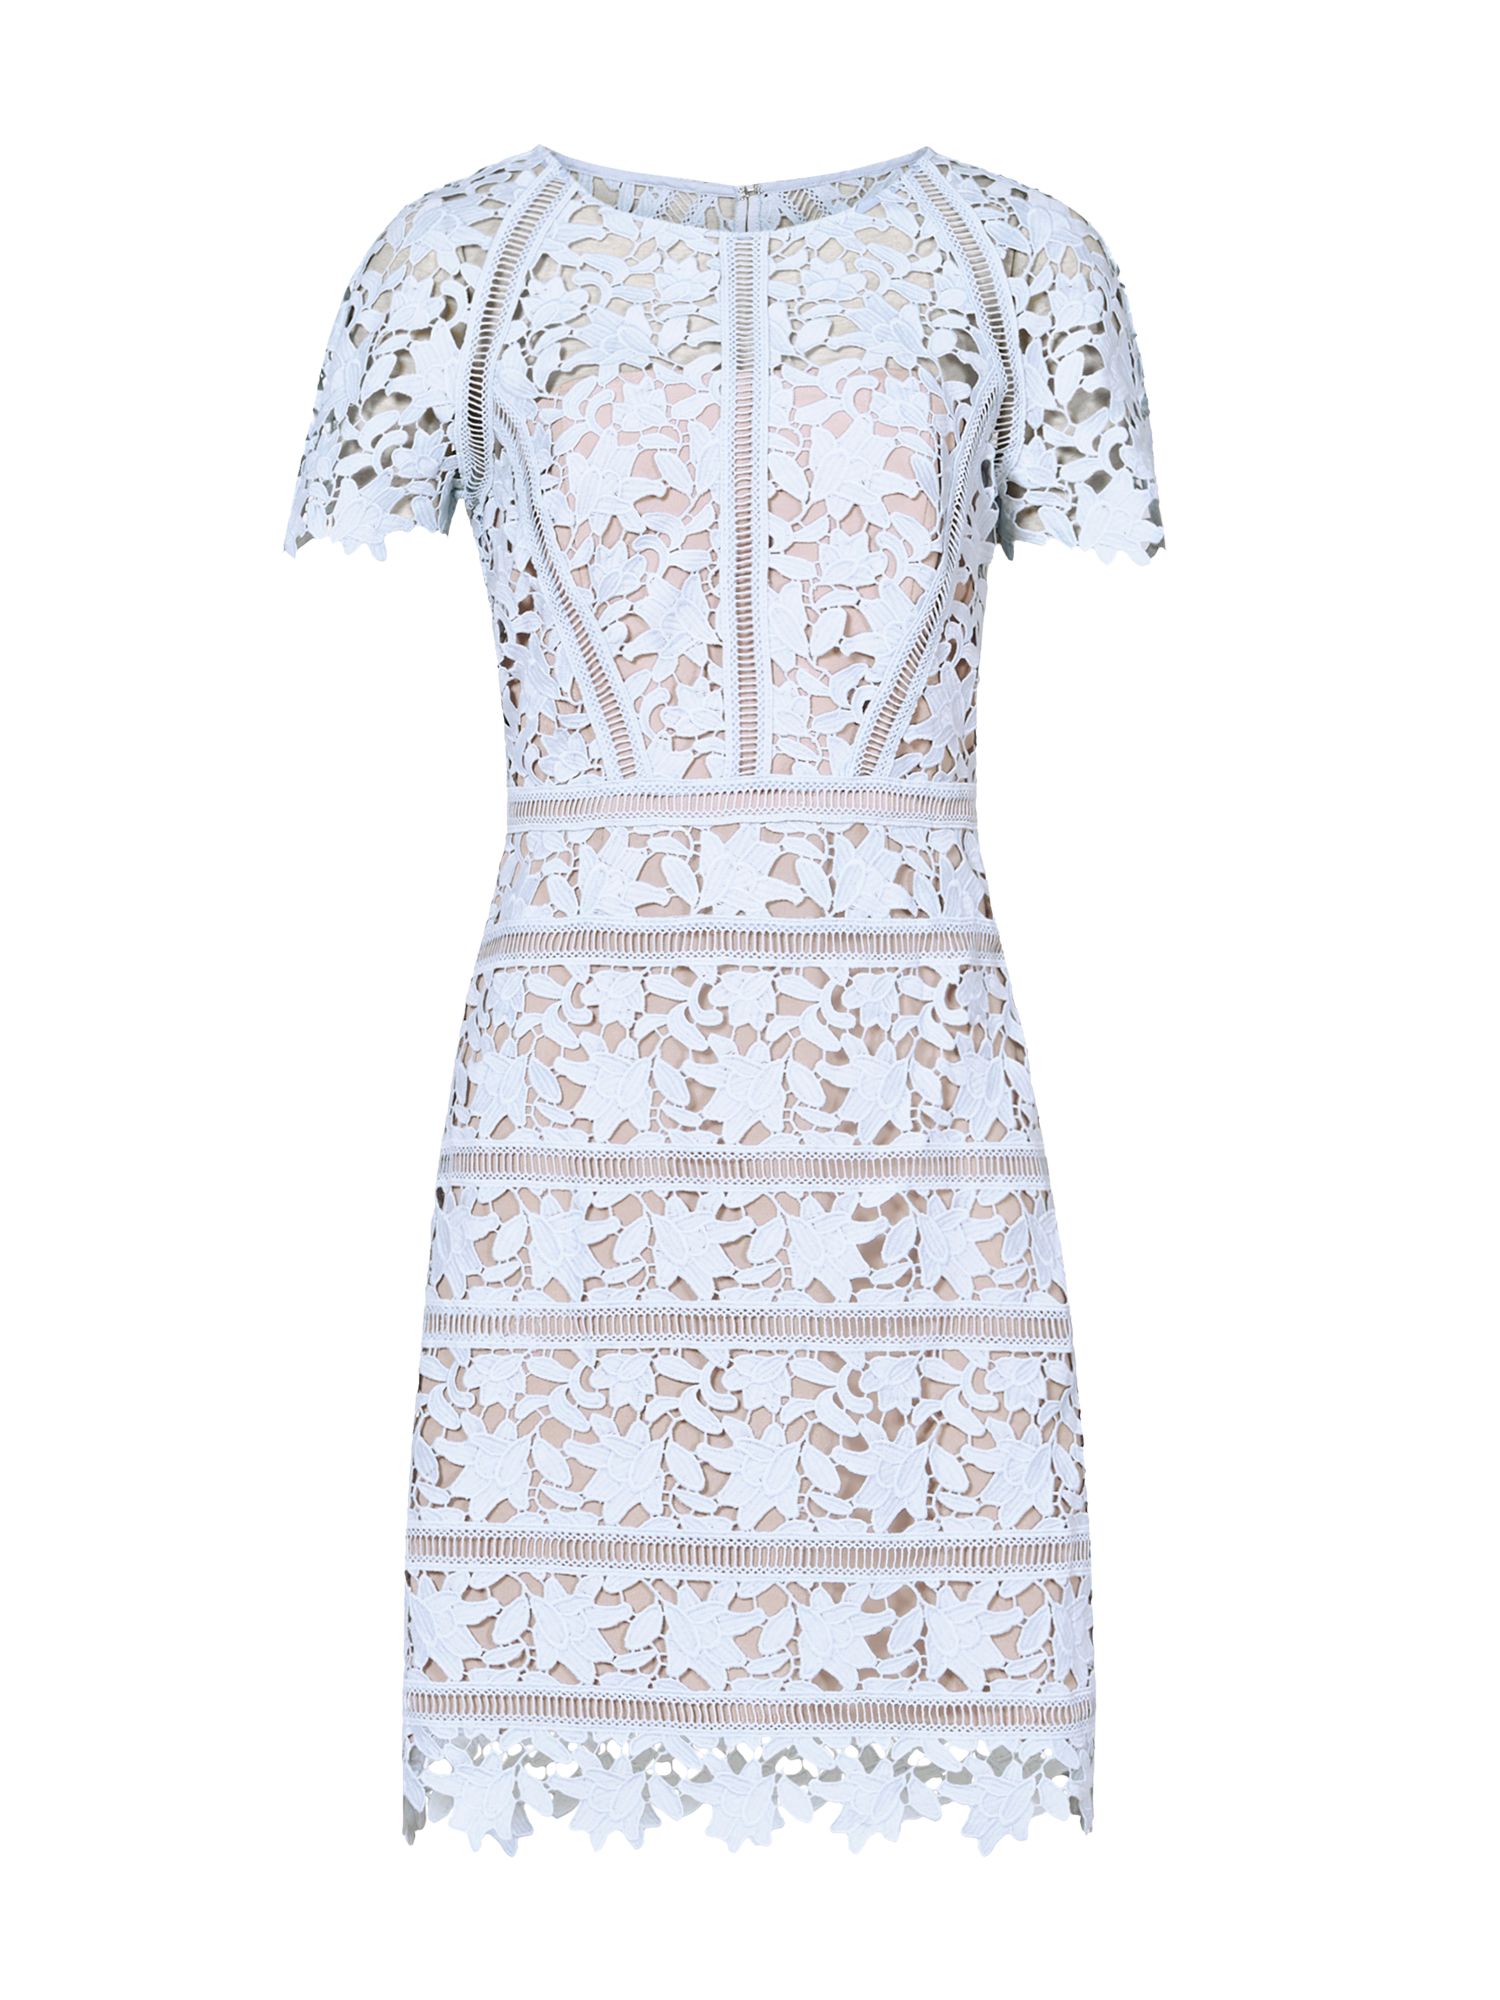 Reiss Orchid Lace Dress, Blue Ice